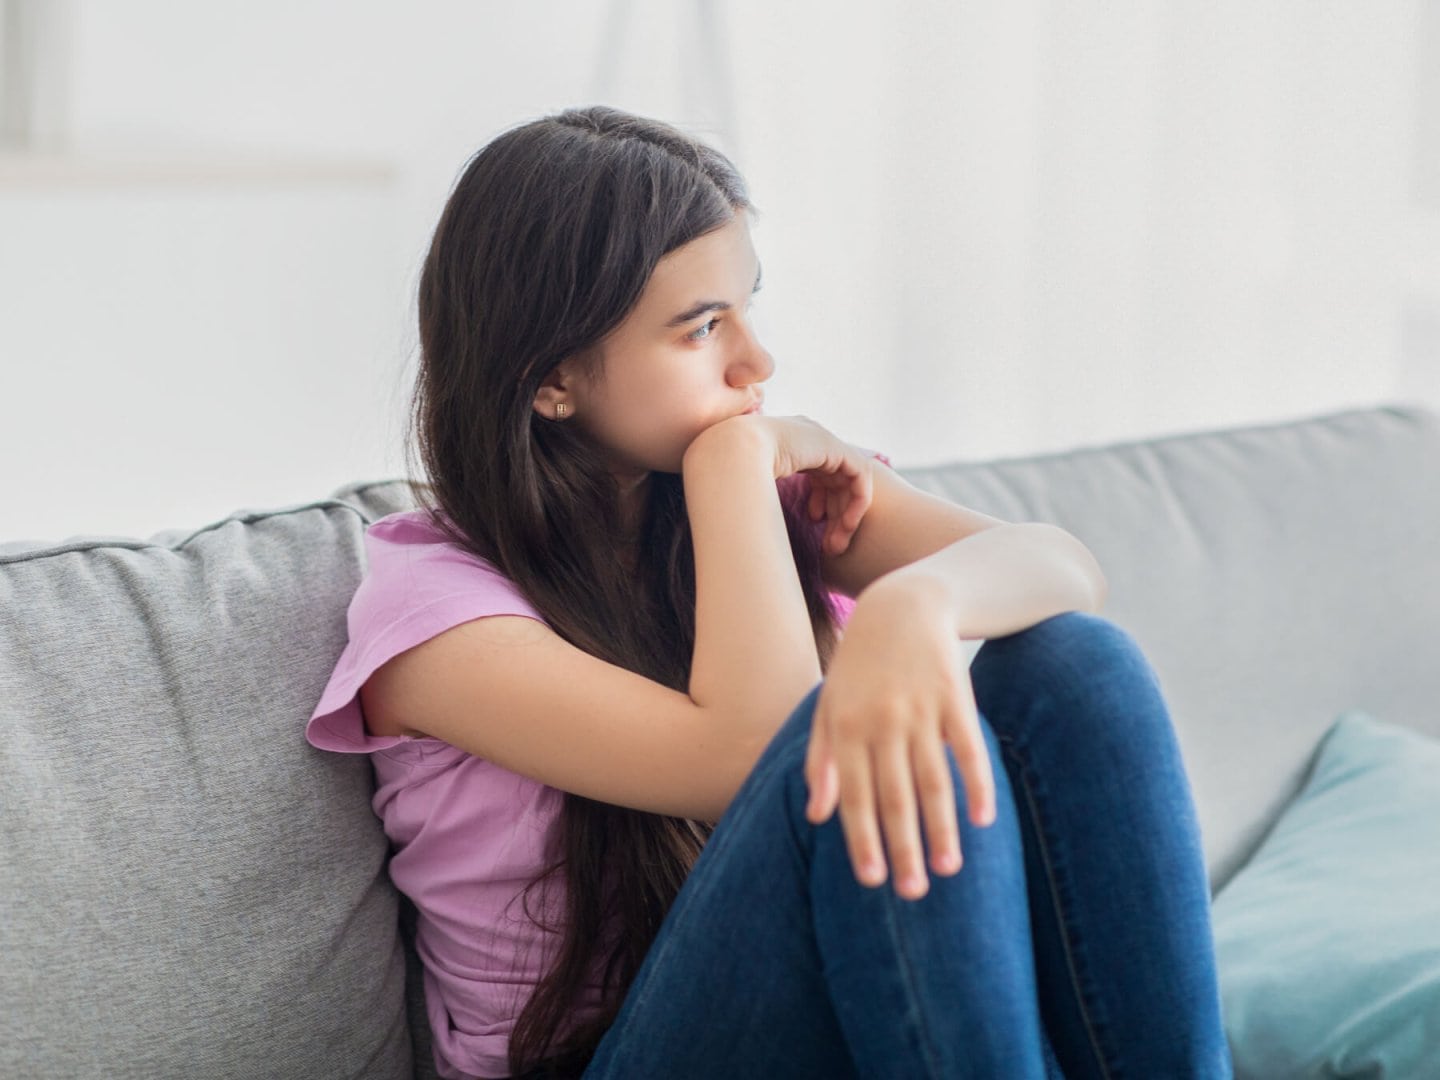 Struggling with teenage social isolation, a girl with long brown hair sits with her knees up and arms crossed on a grey sofa, looking away from the viewer.